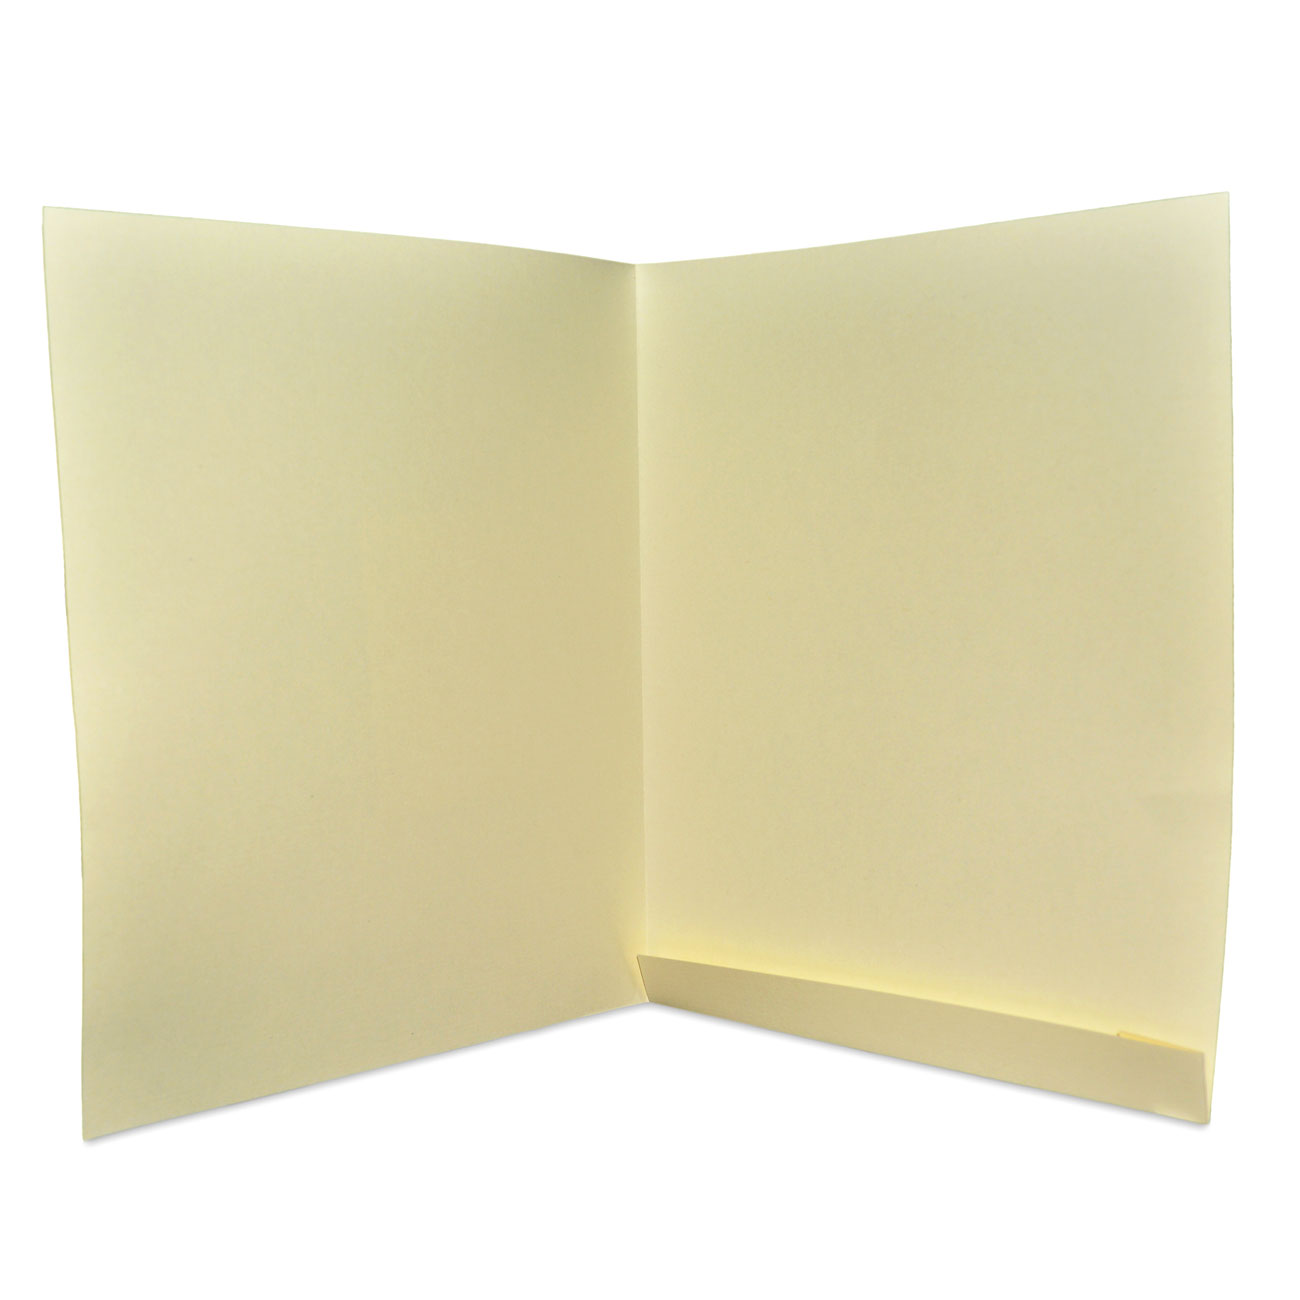 Tax Return Cover - Ivory Blank - Letter Size, 8 3/4"W x 11 1/4"H, Ivory Tax Return / Audit Cover, 80 lb. Stock, Plain/Not Printed, 30% Recycled, 50% PCW, 100/BX